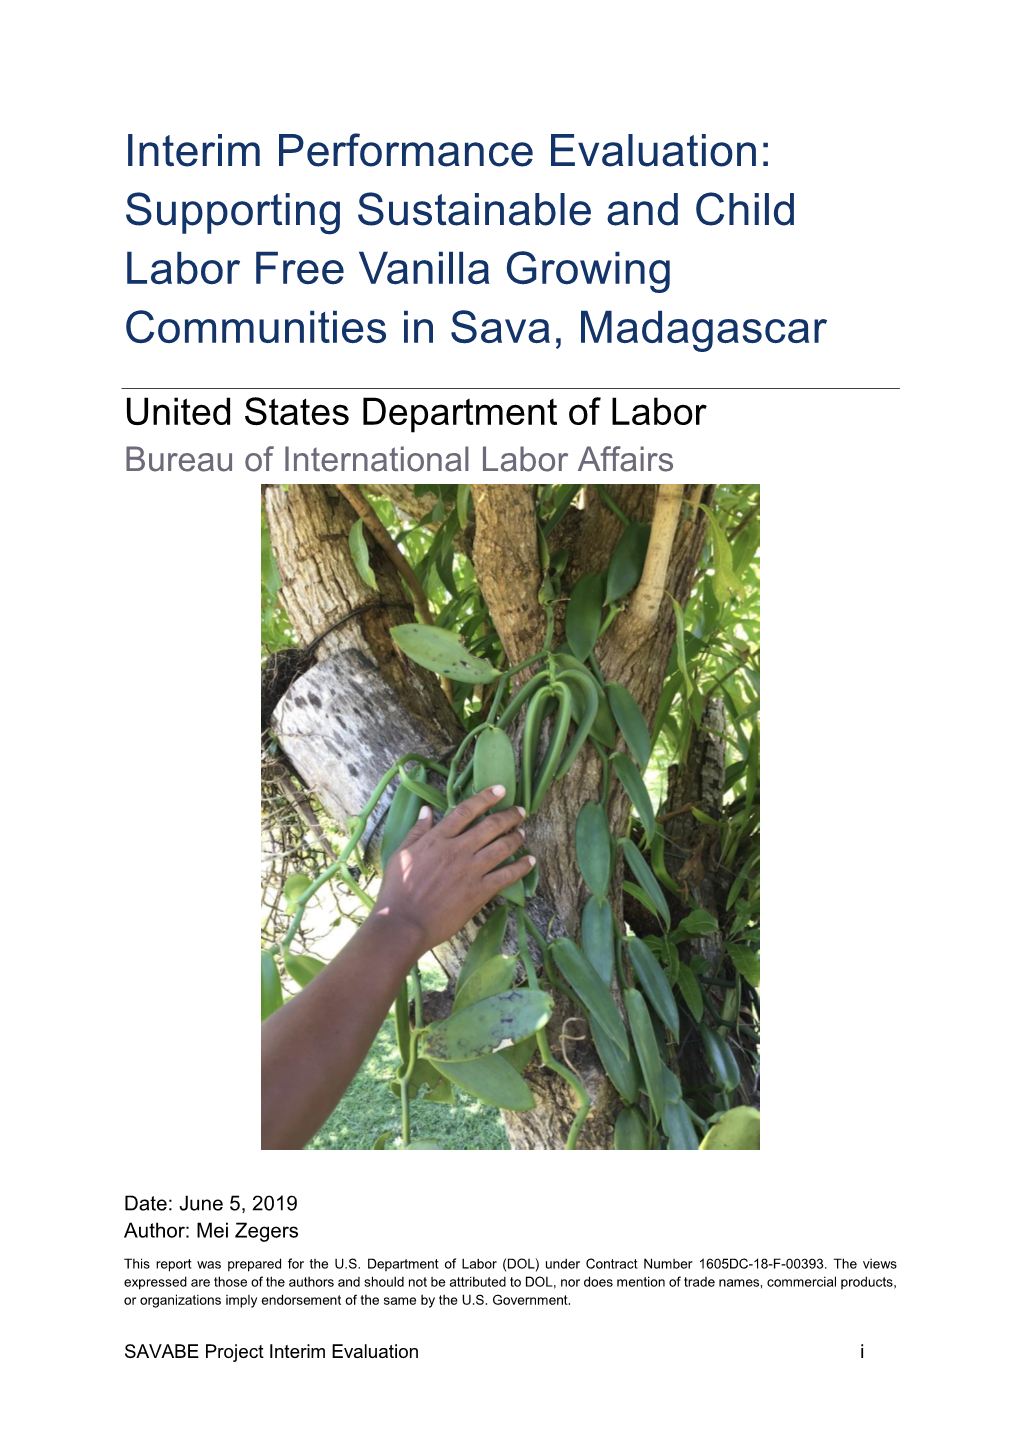 Interim Performance Evaluation: Supporting Sustainable and Child Labor Free Vanilla Growing Communities in Sava, Madagascar